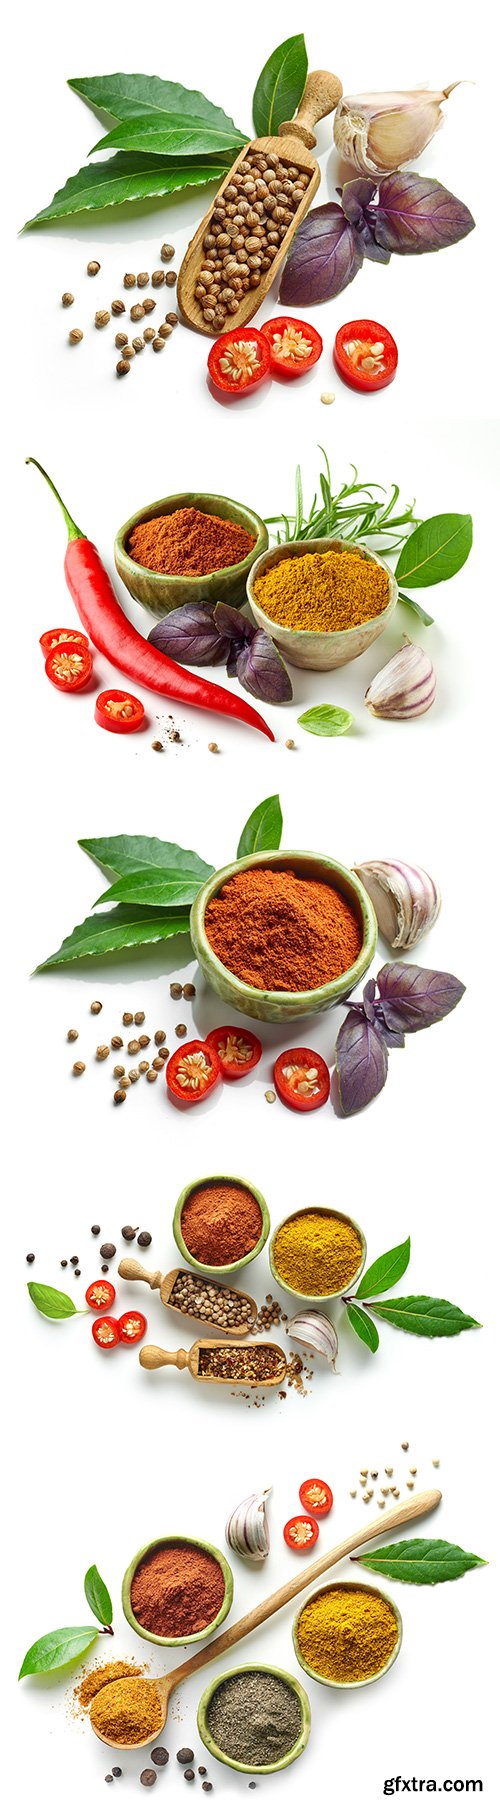 Various Spices Isolated - 7xJPGs